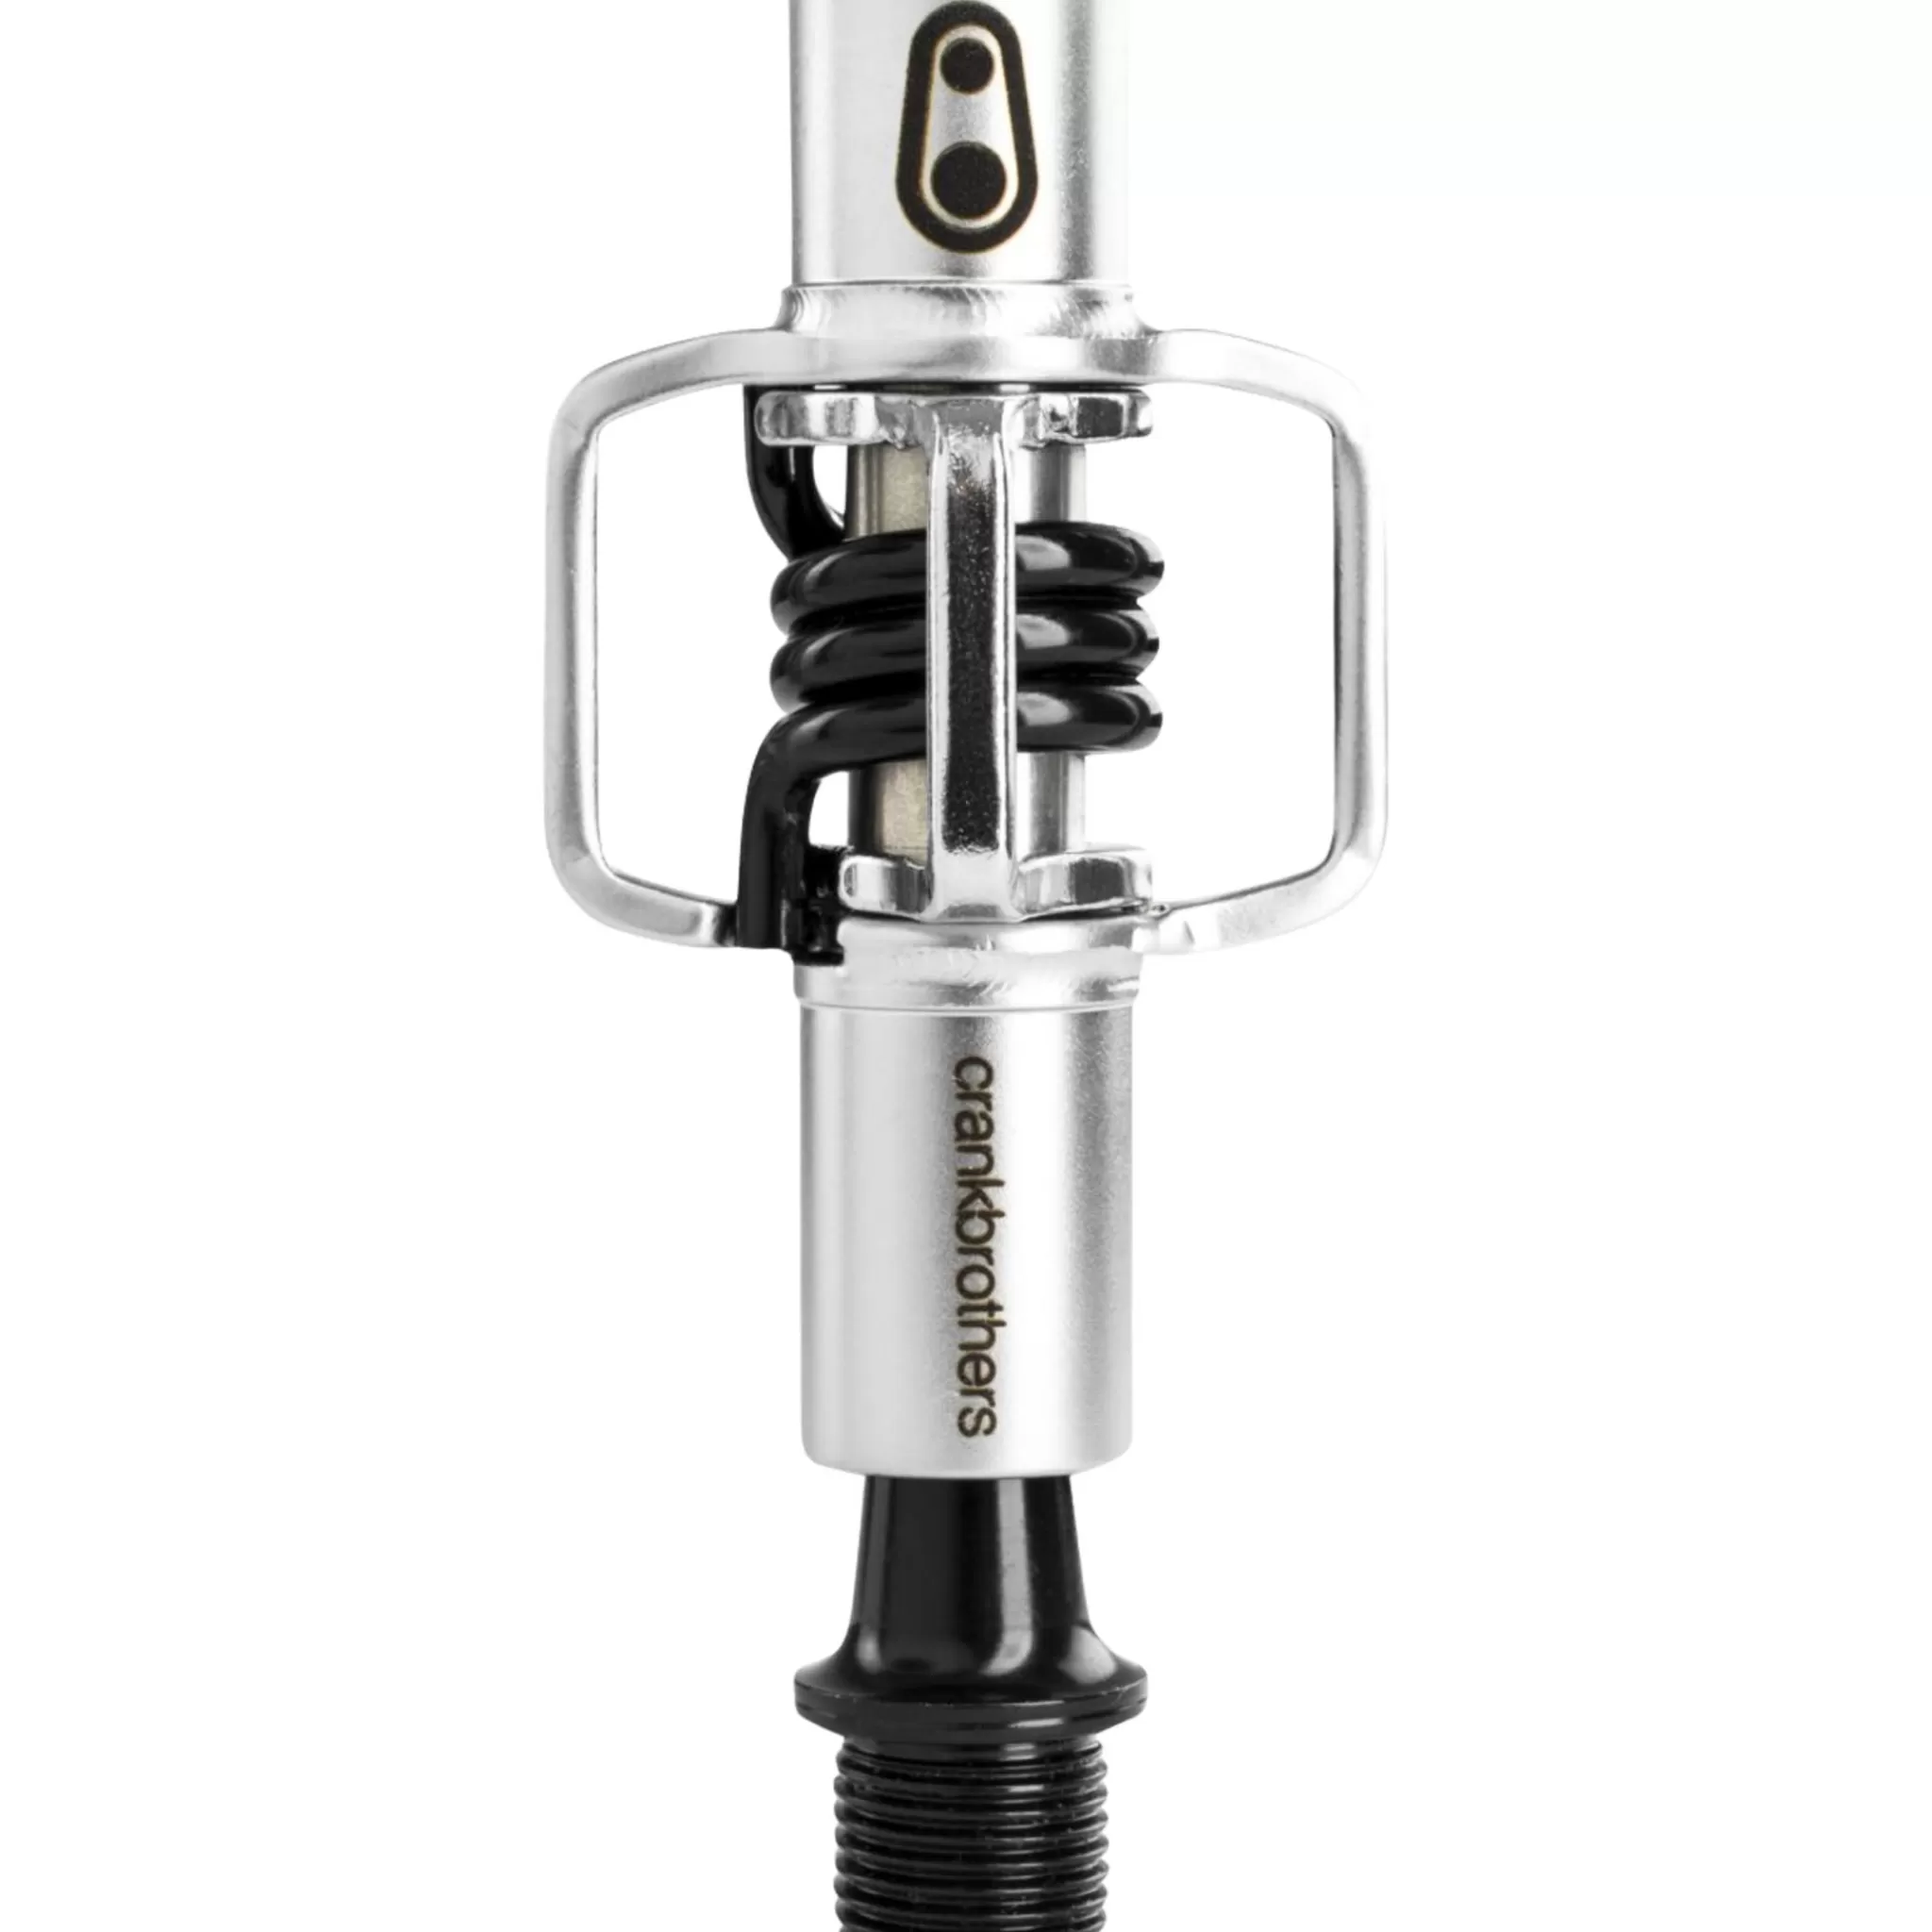 Flash Sale Crankbrothers Eggbeater 1, Terrengpedal Med Cleats